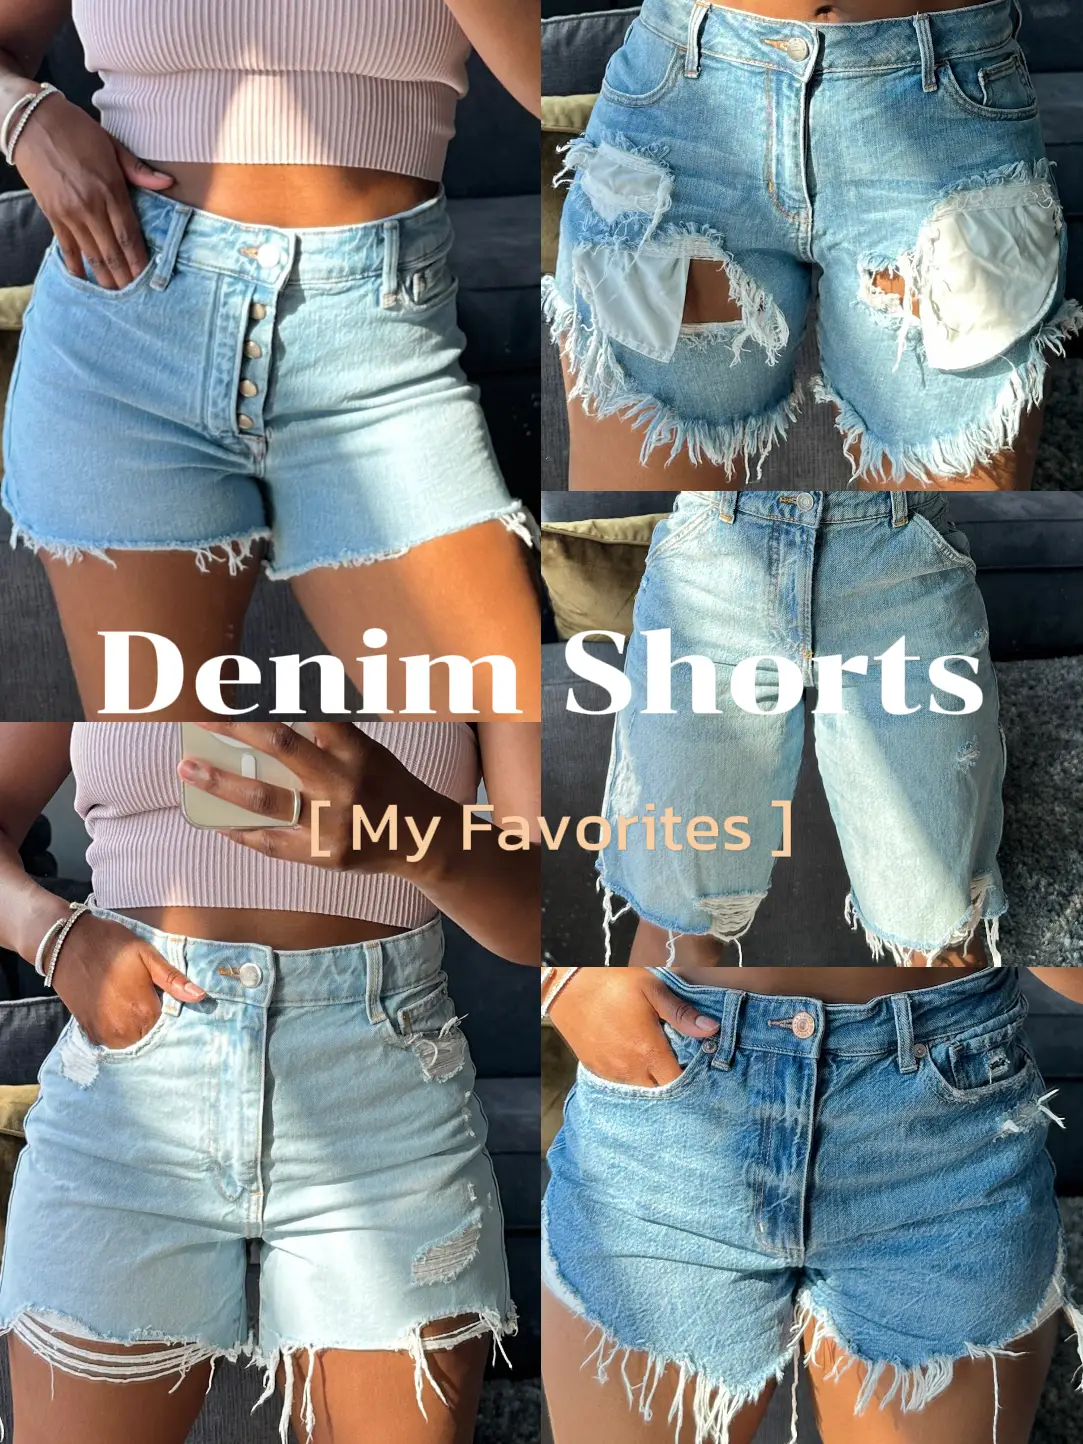 Basic difference between skinny jeans and jegging, #shorts